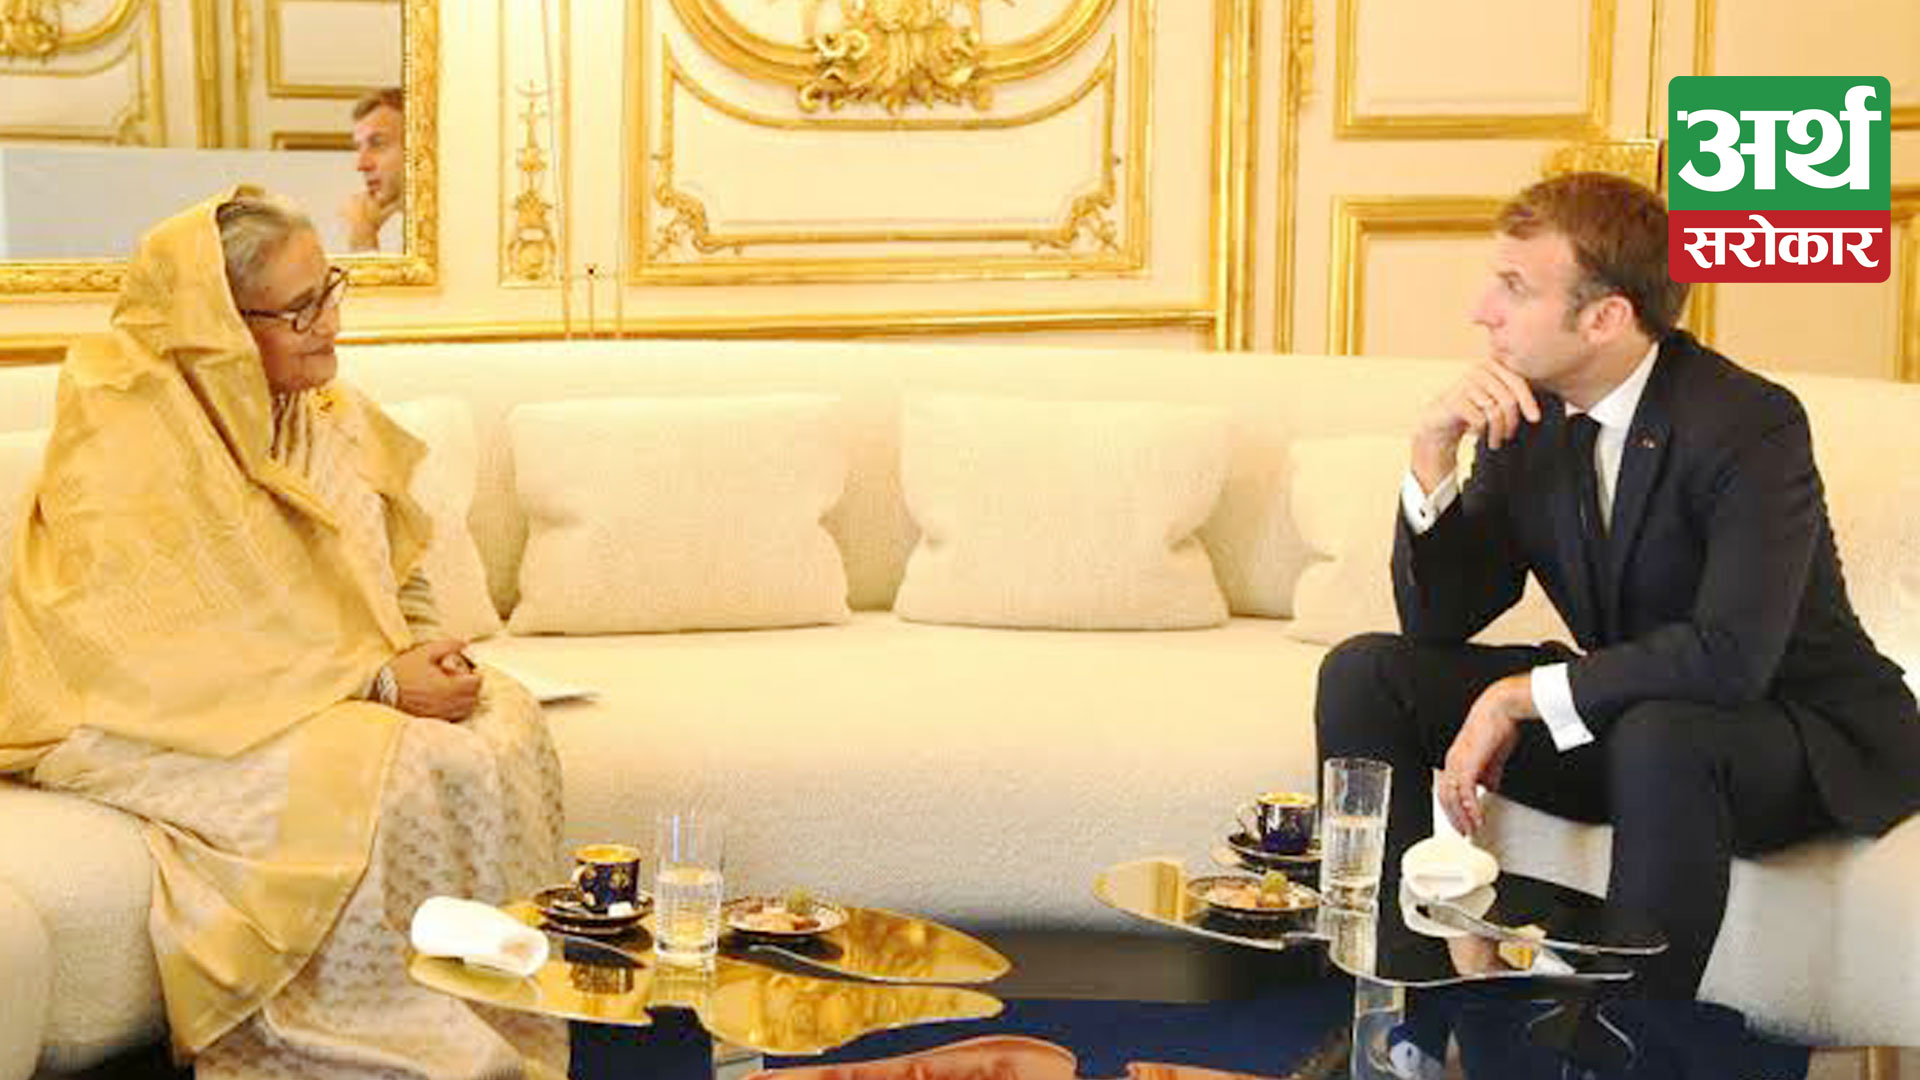 France And Bangladesh Can Benefit From Growing Trade And Strategic Ties